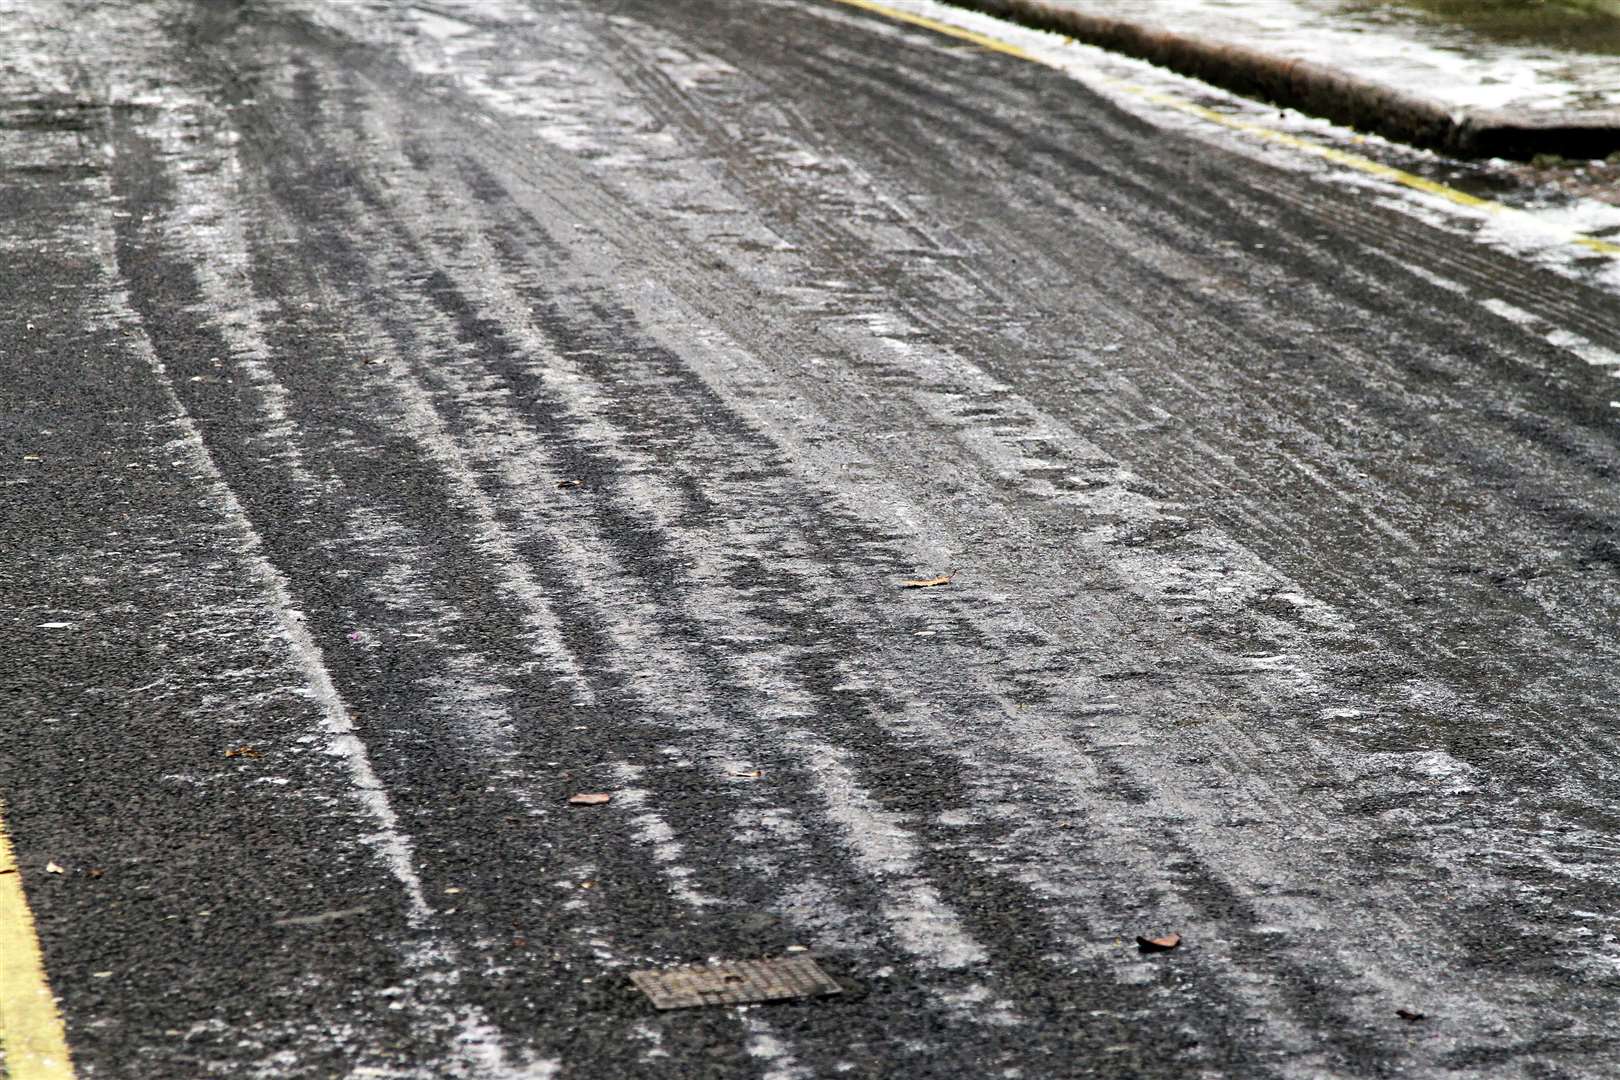 The Met Office has warned people in Kent to expect icy patches to form overnight